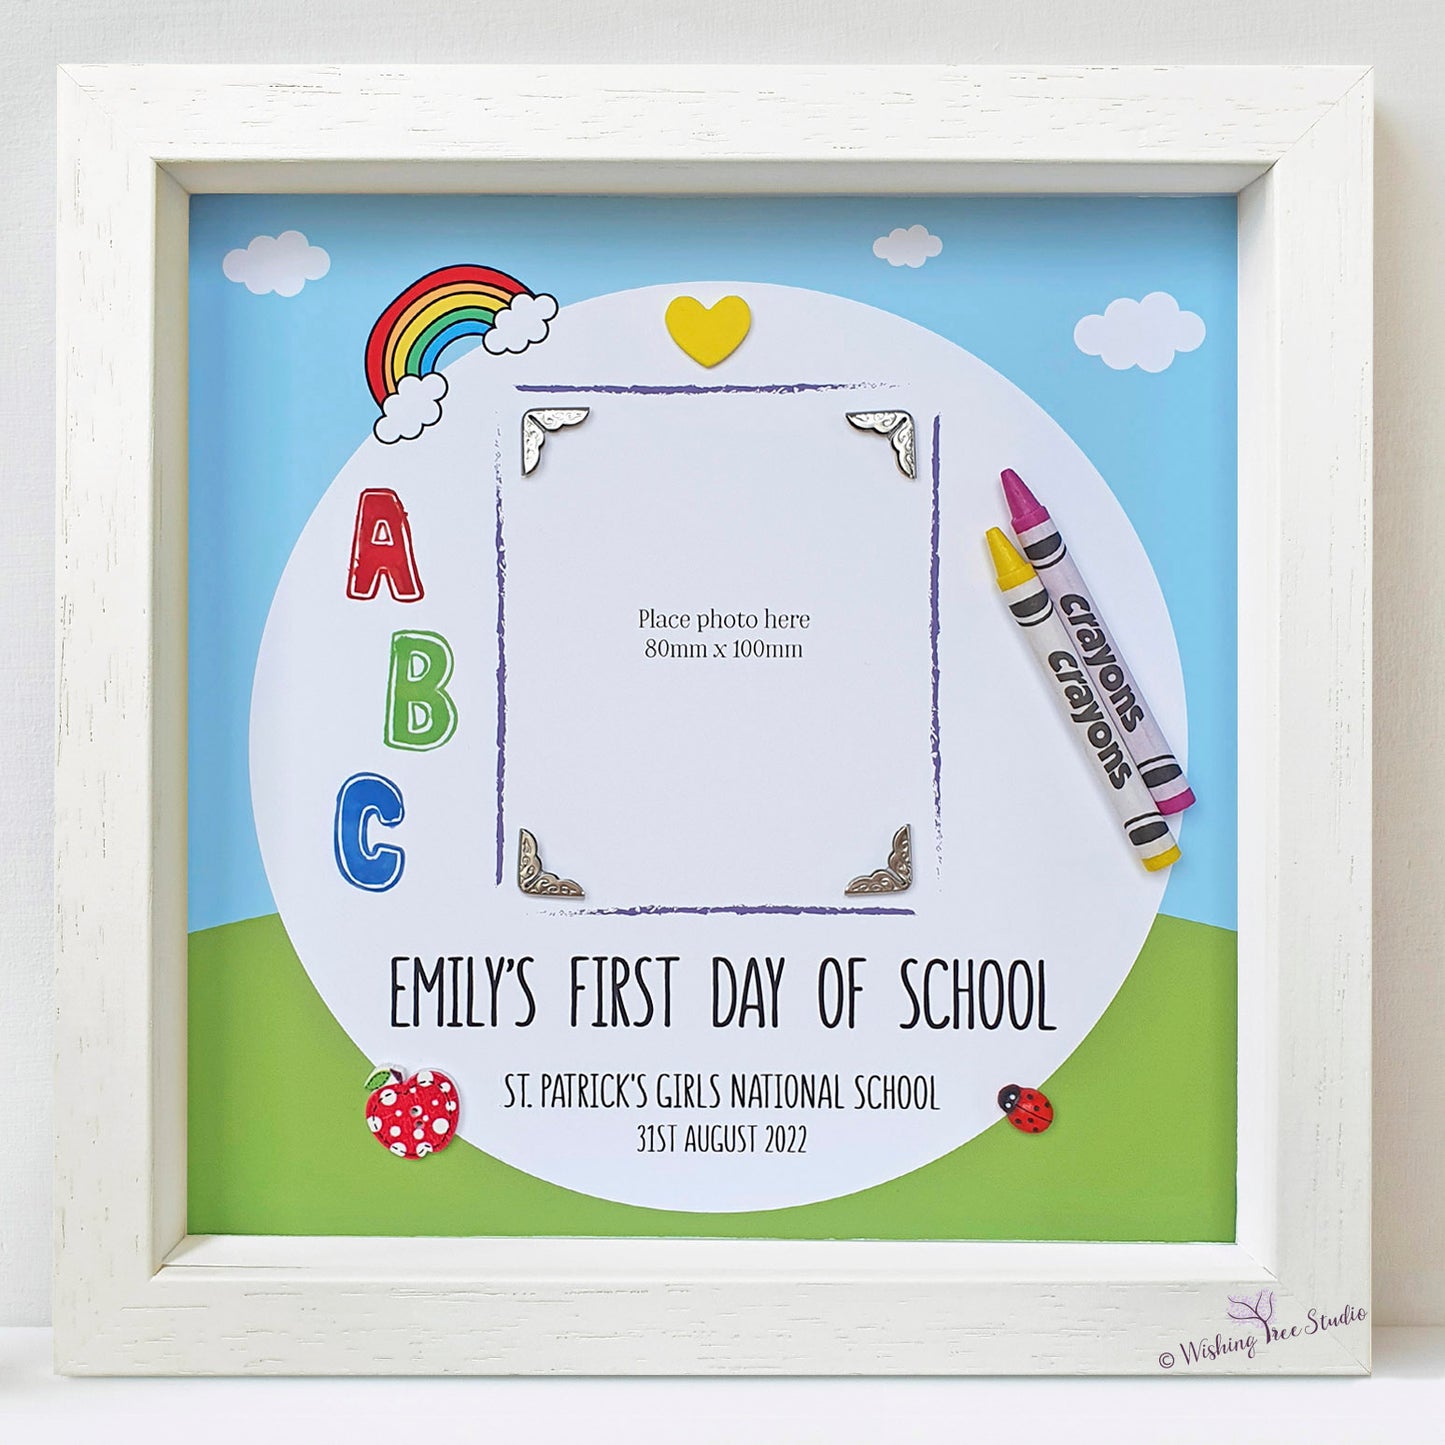 First Day of School photo frame